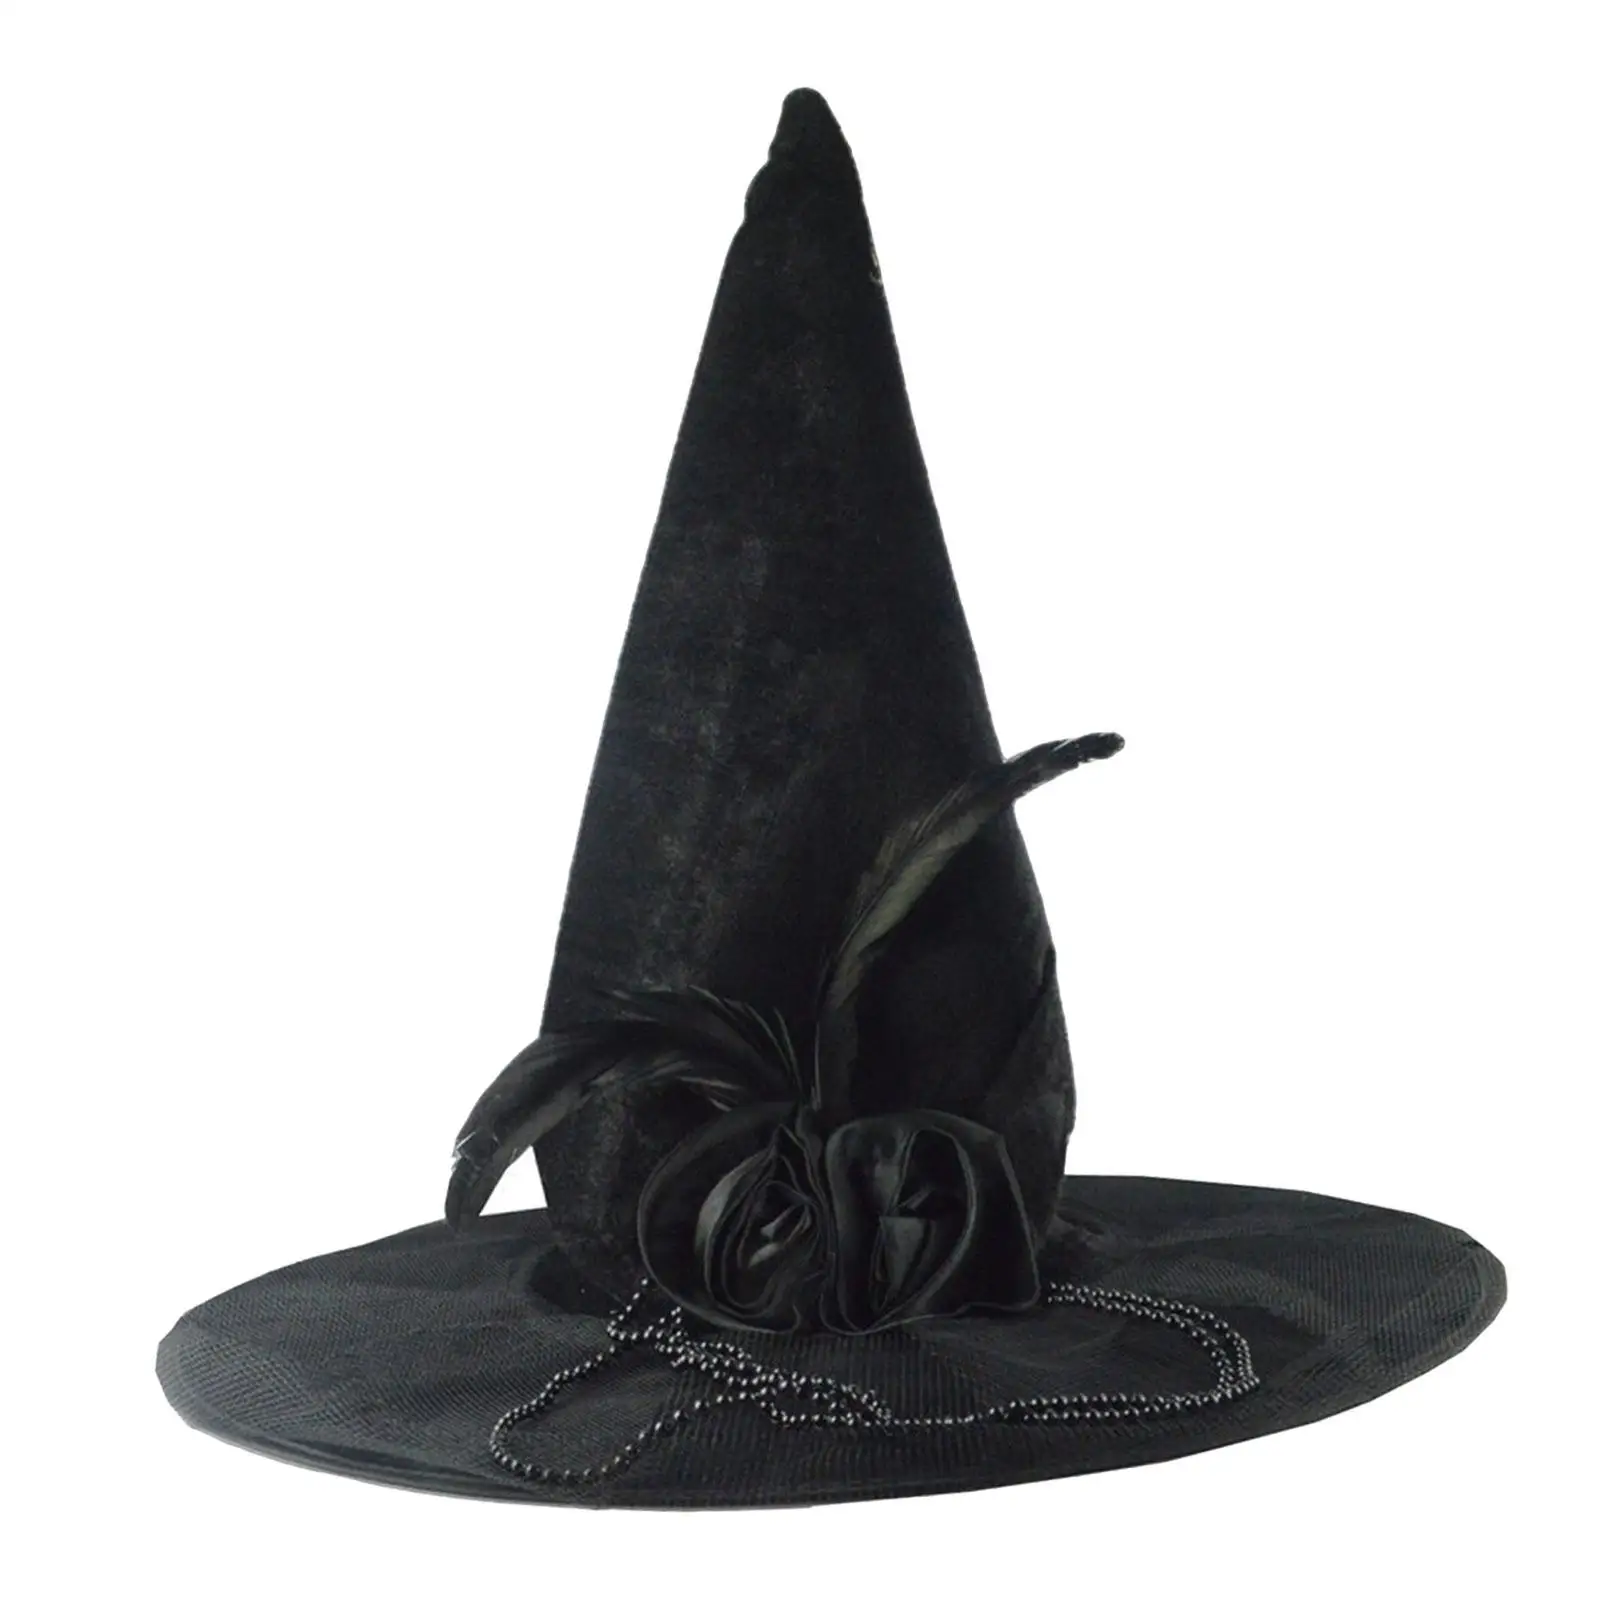 Halloween Witch Hat Novelty Black Women Decorative Pointed Top Hat for Fancy Dress Party Stage Performance Photo Props